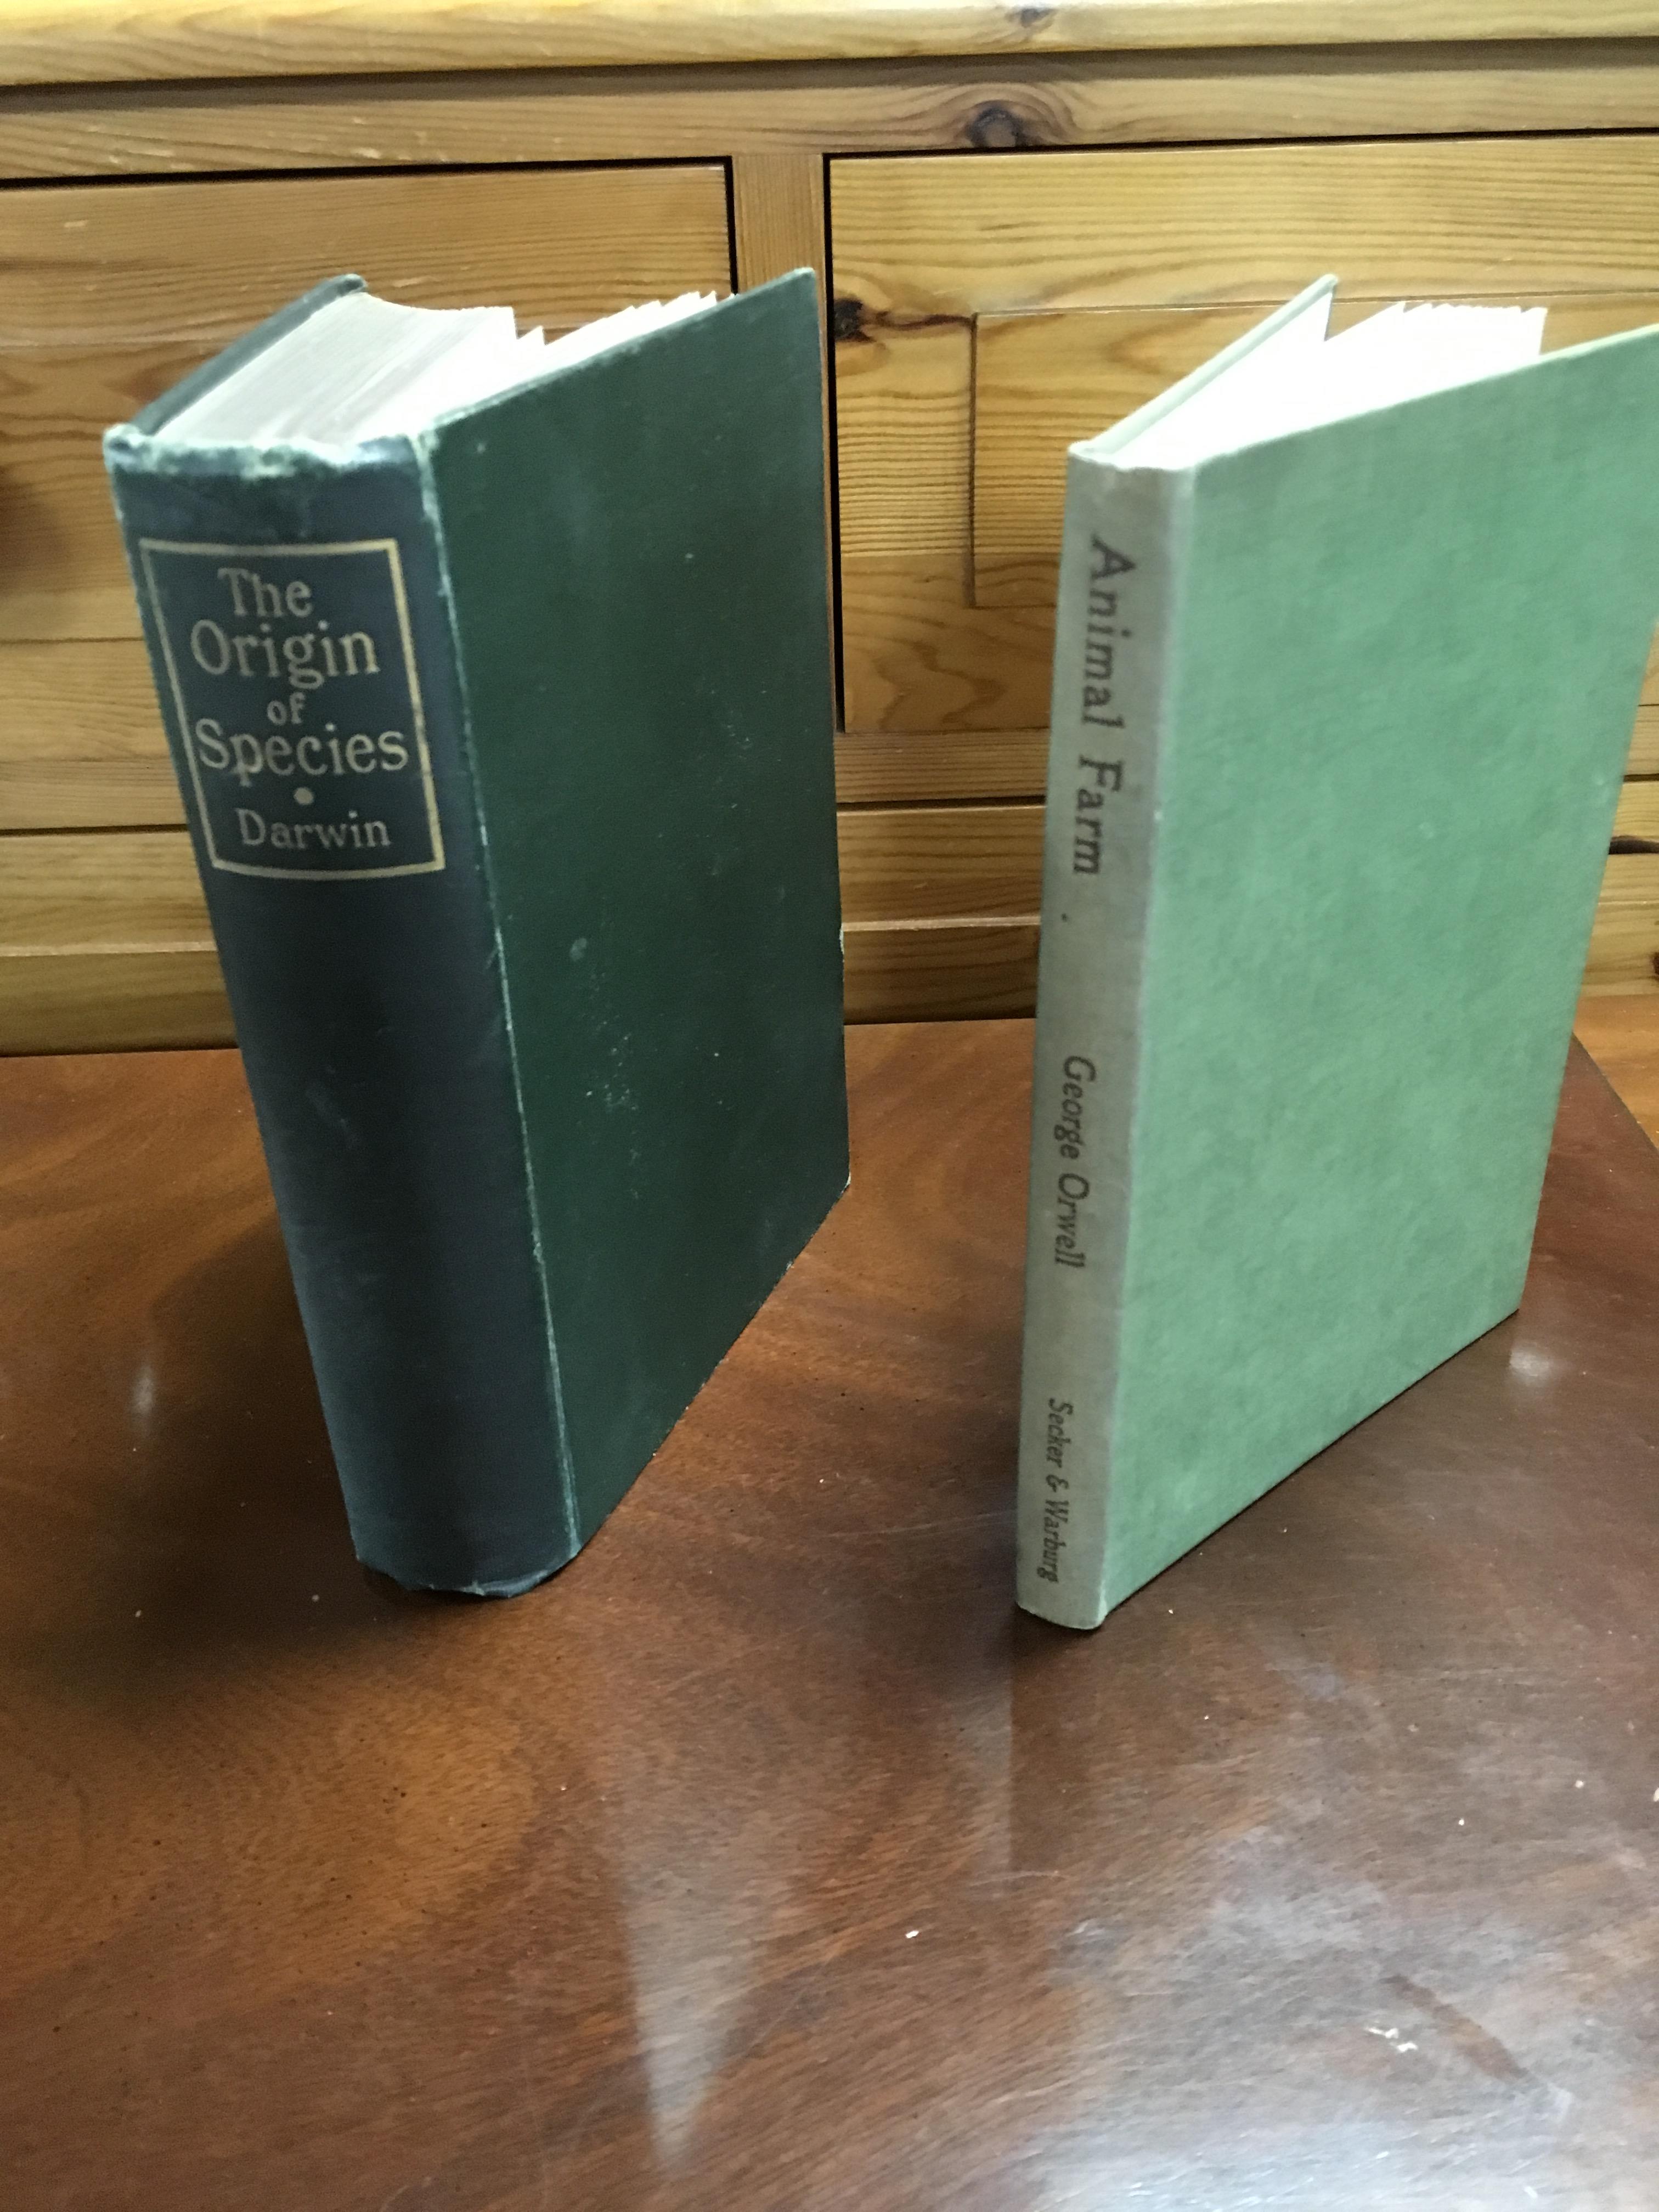 Darwin (Charles) Origin of Species. Original plain green binding with gilt title on the spine.